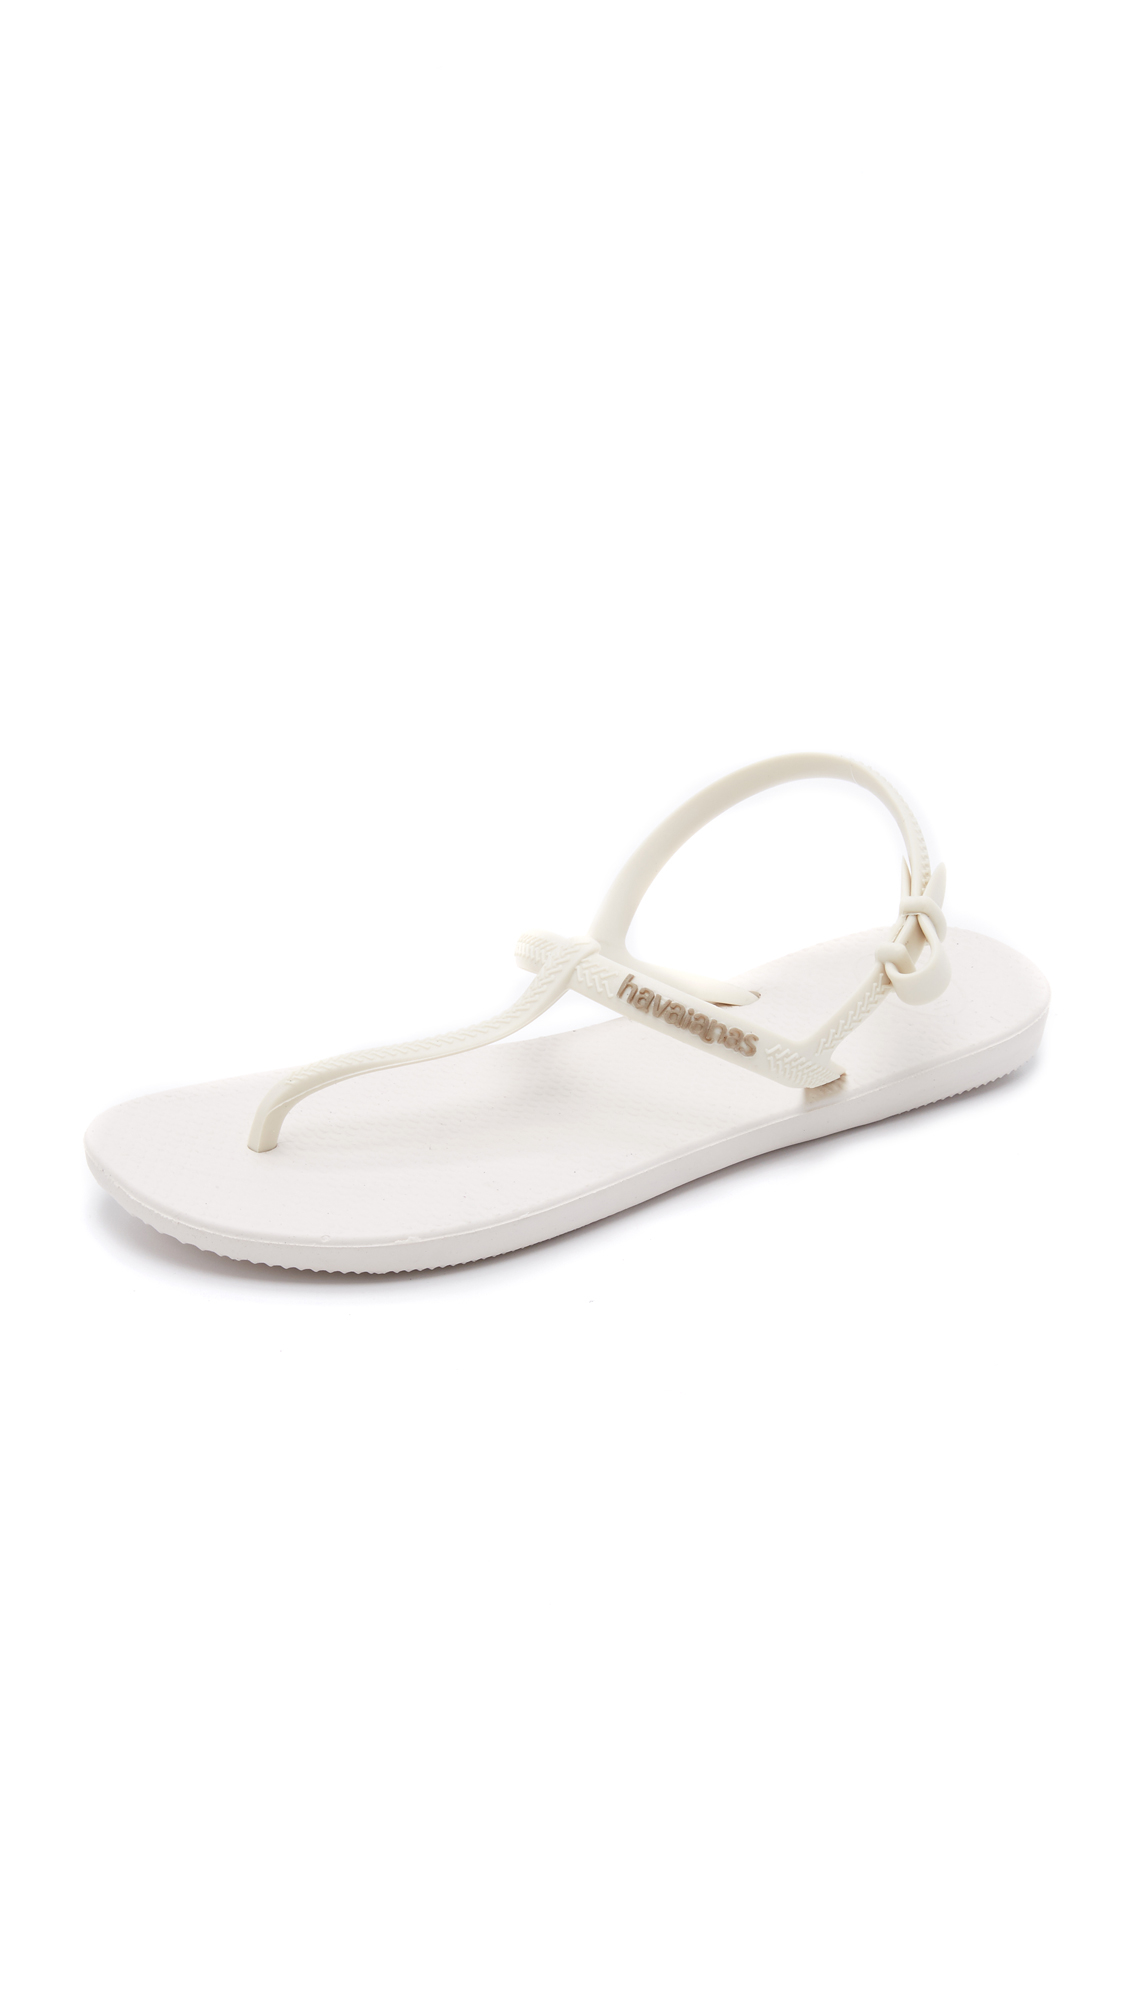 Havaianas Freedom Sandals in White | Lyst